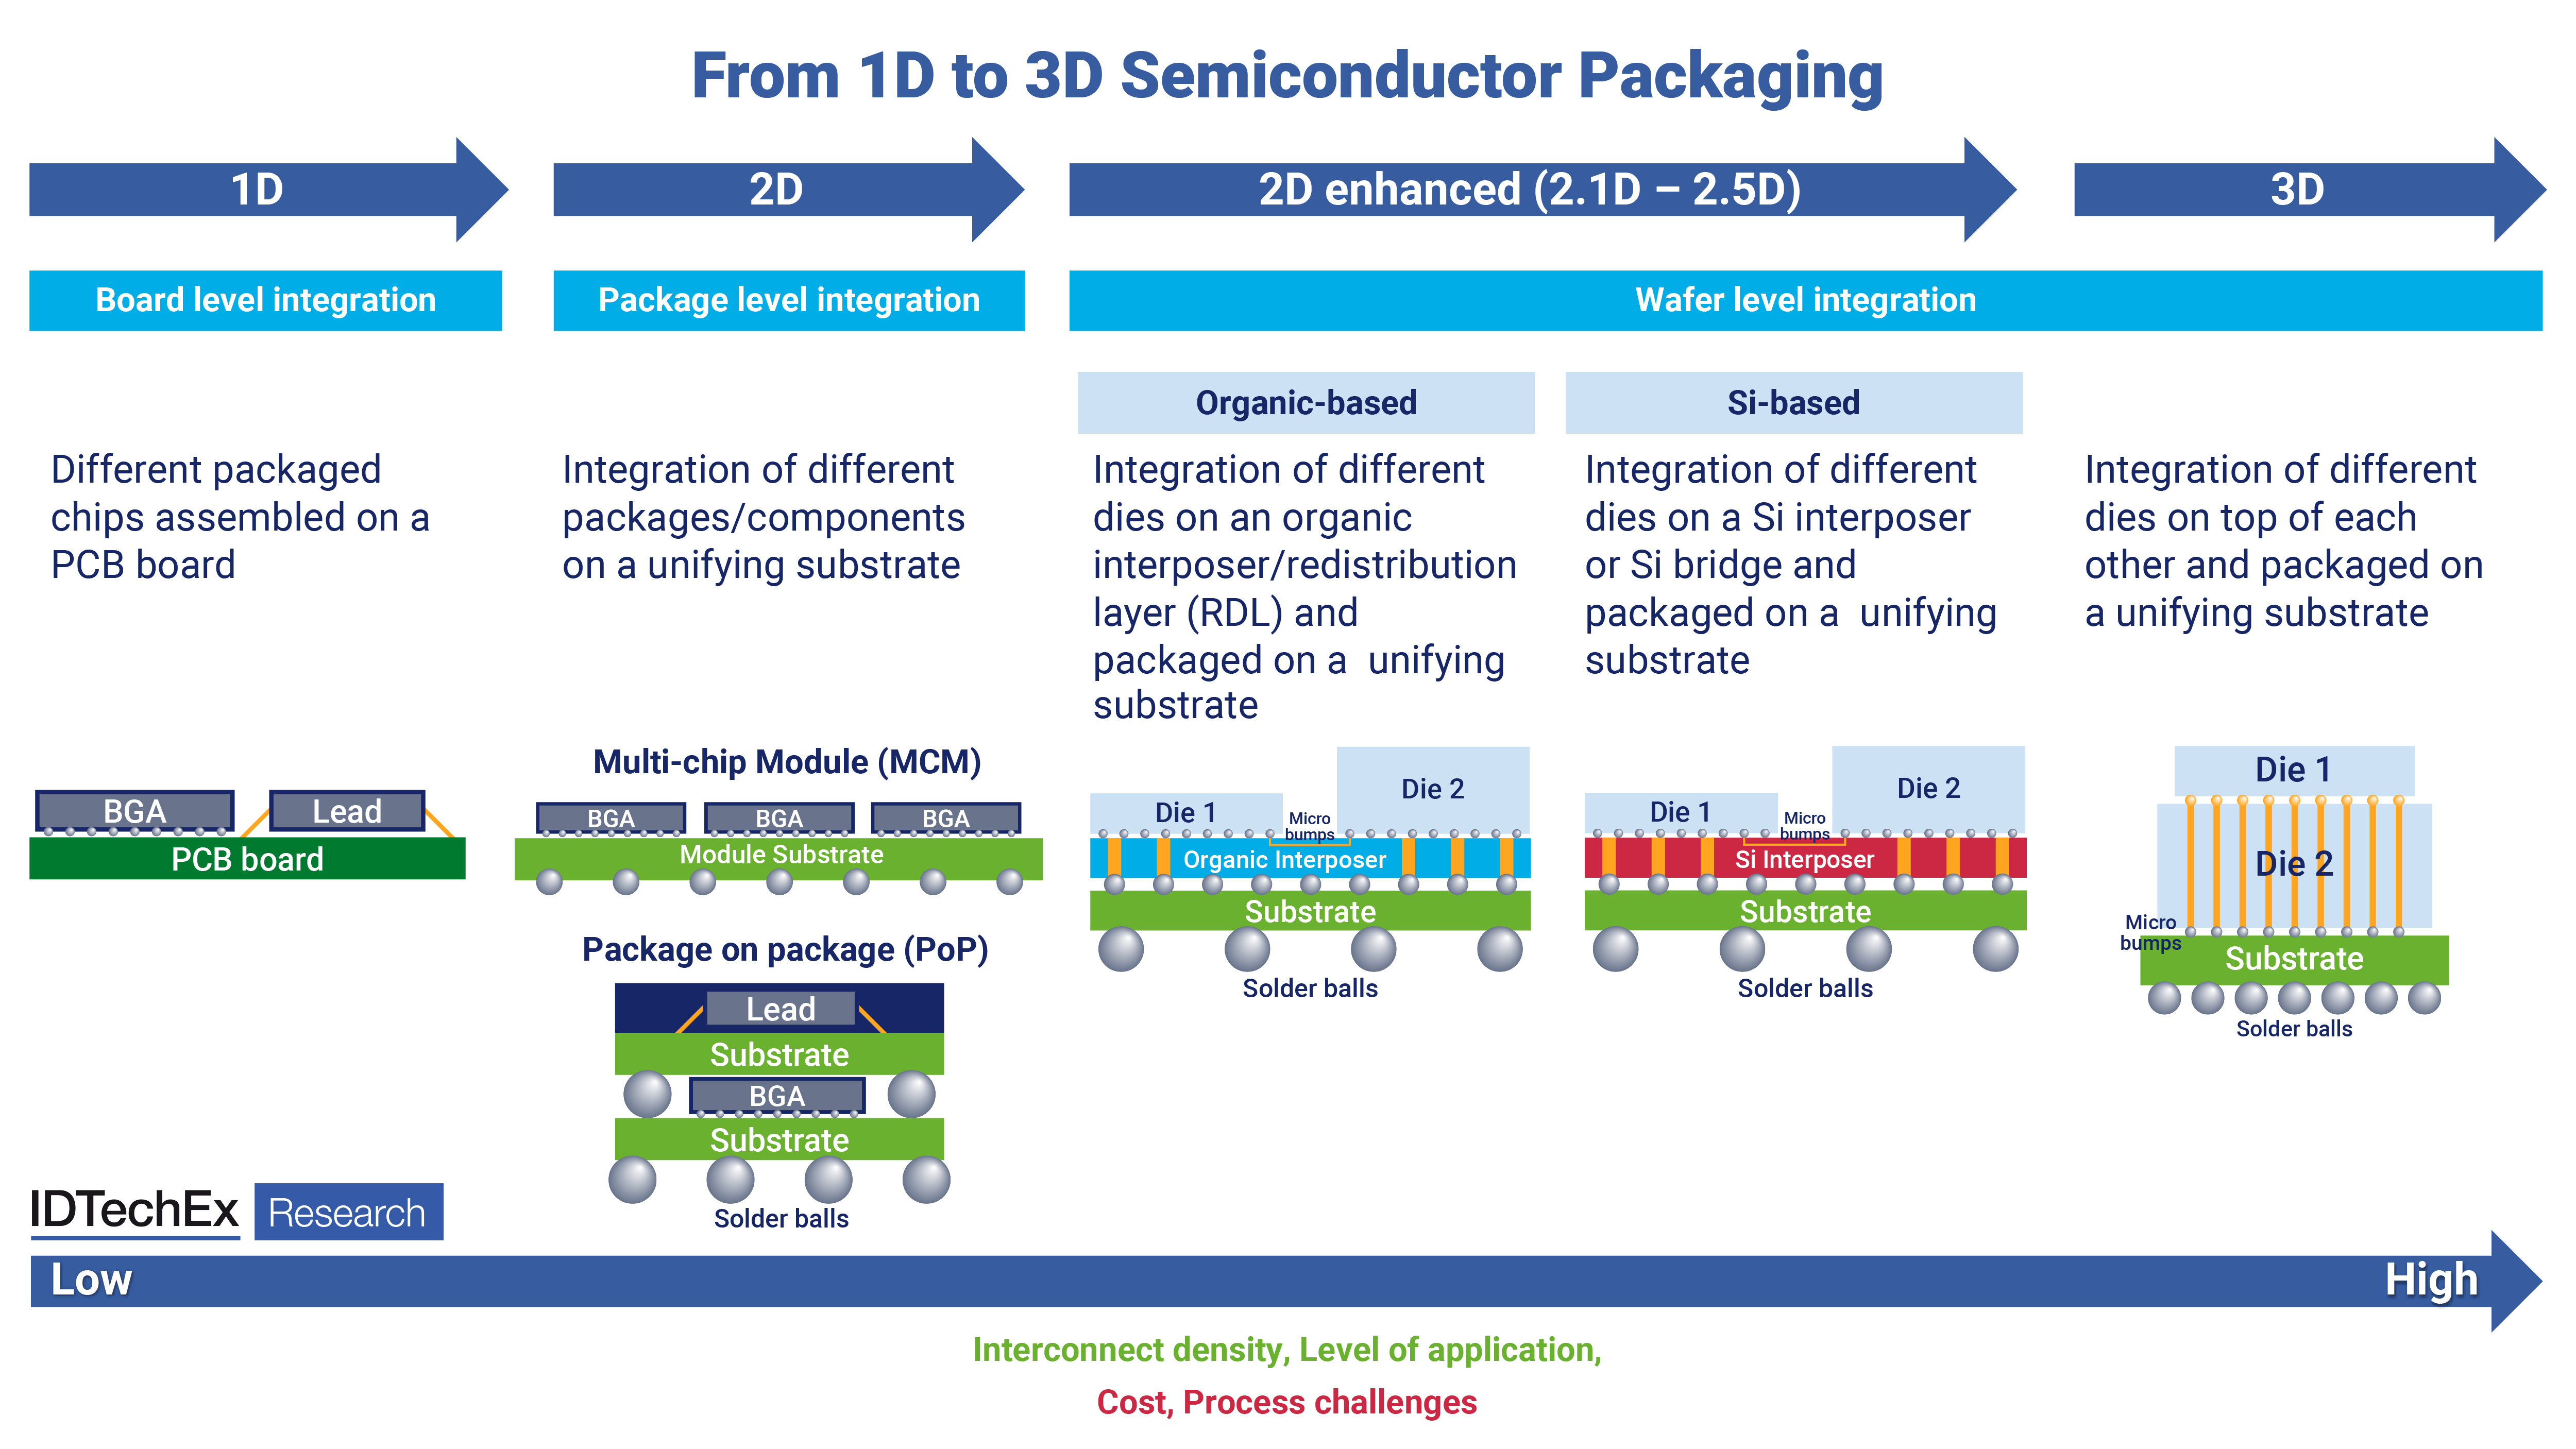 The evolution of semiconductor packaging. Source: IDTechEx report 